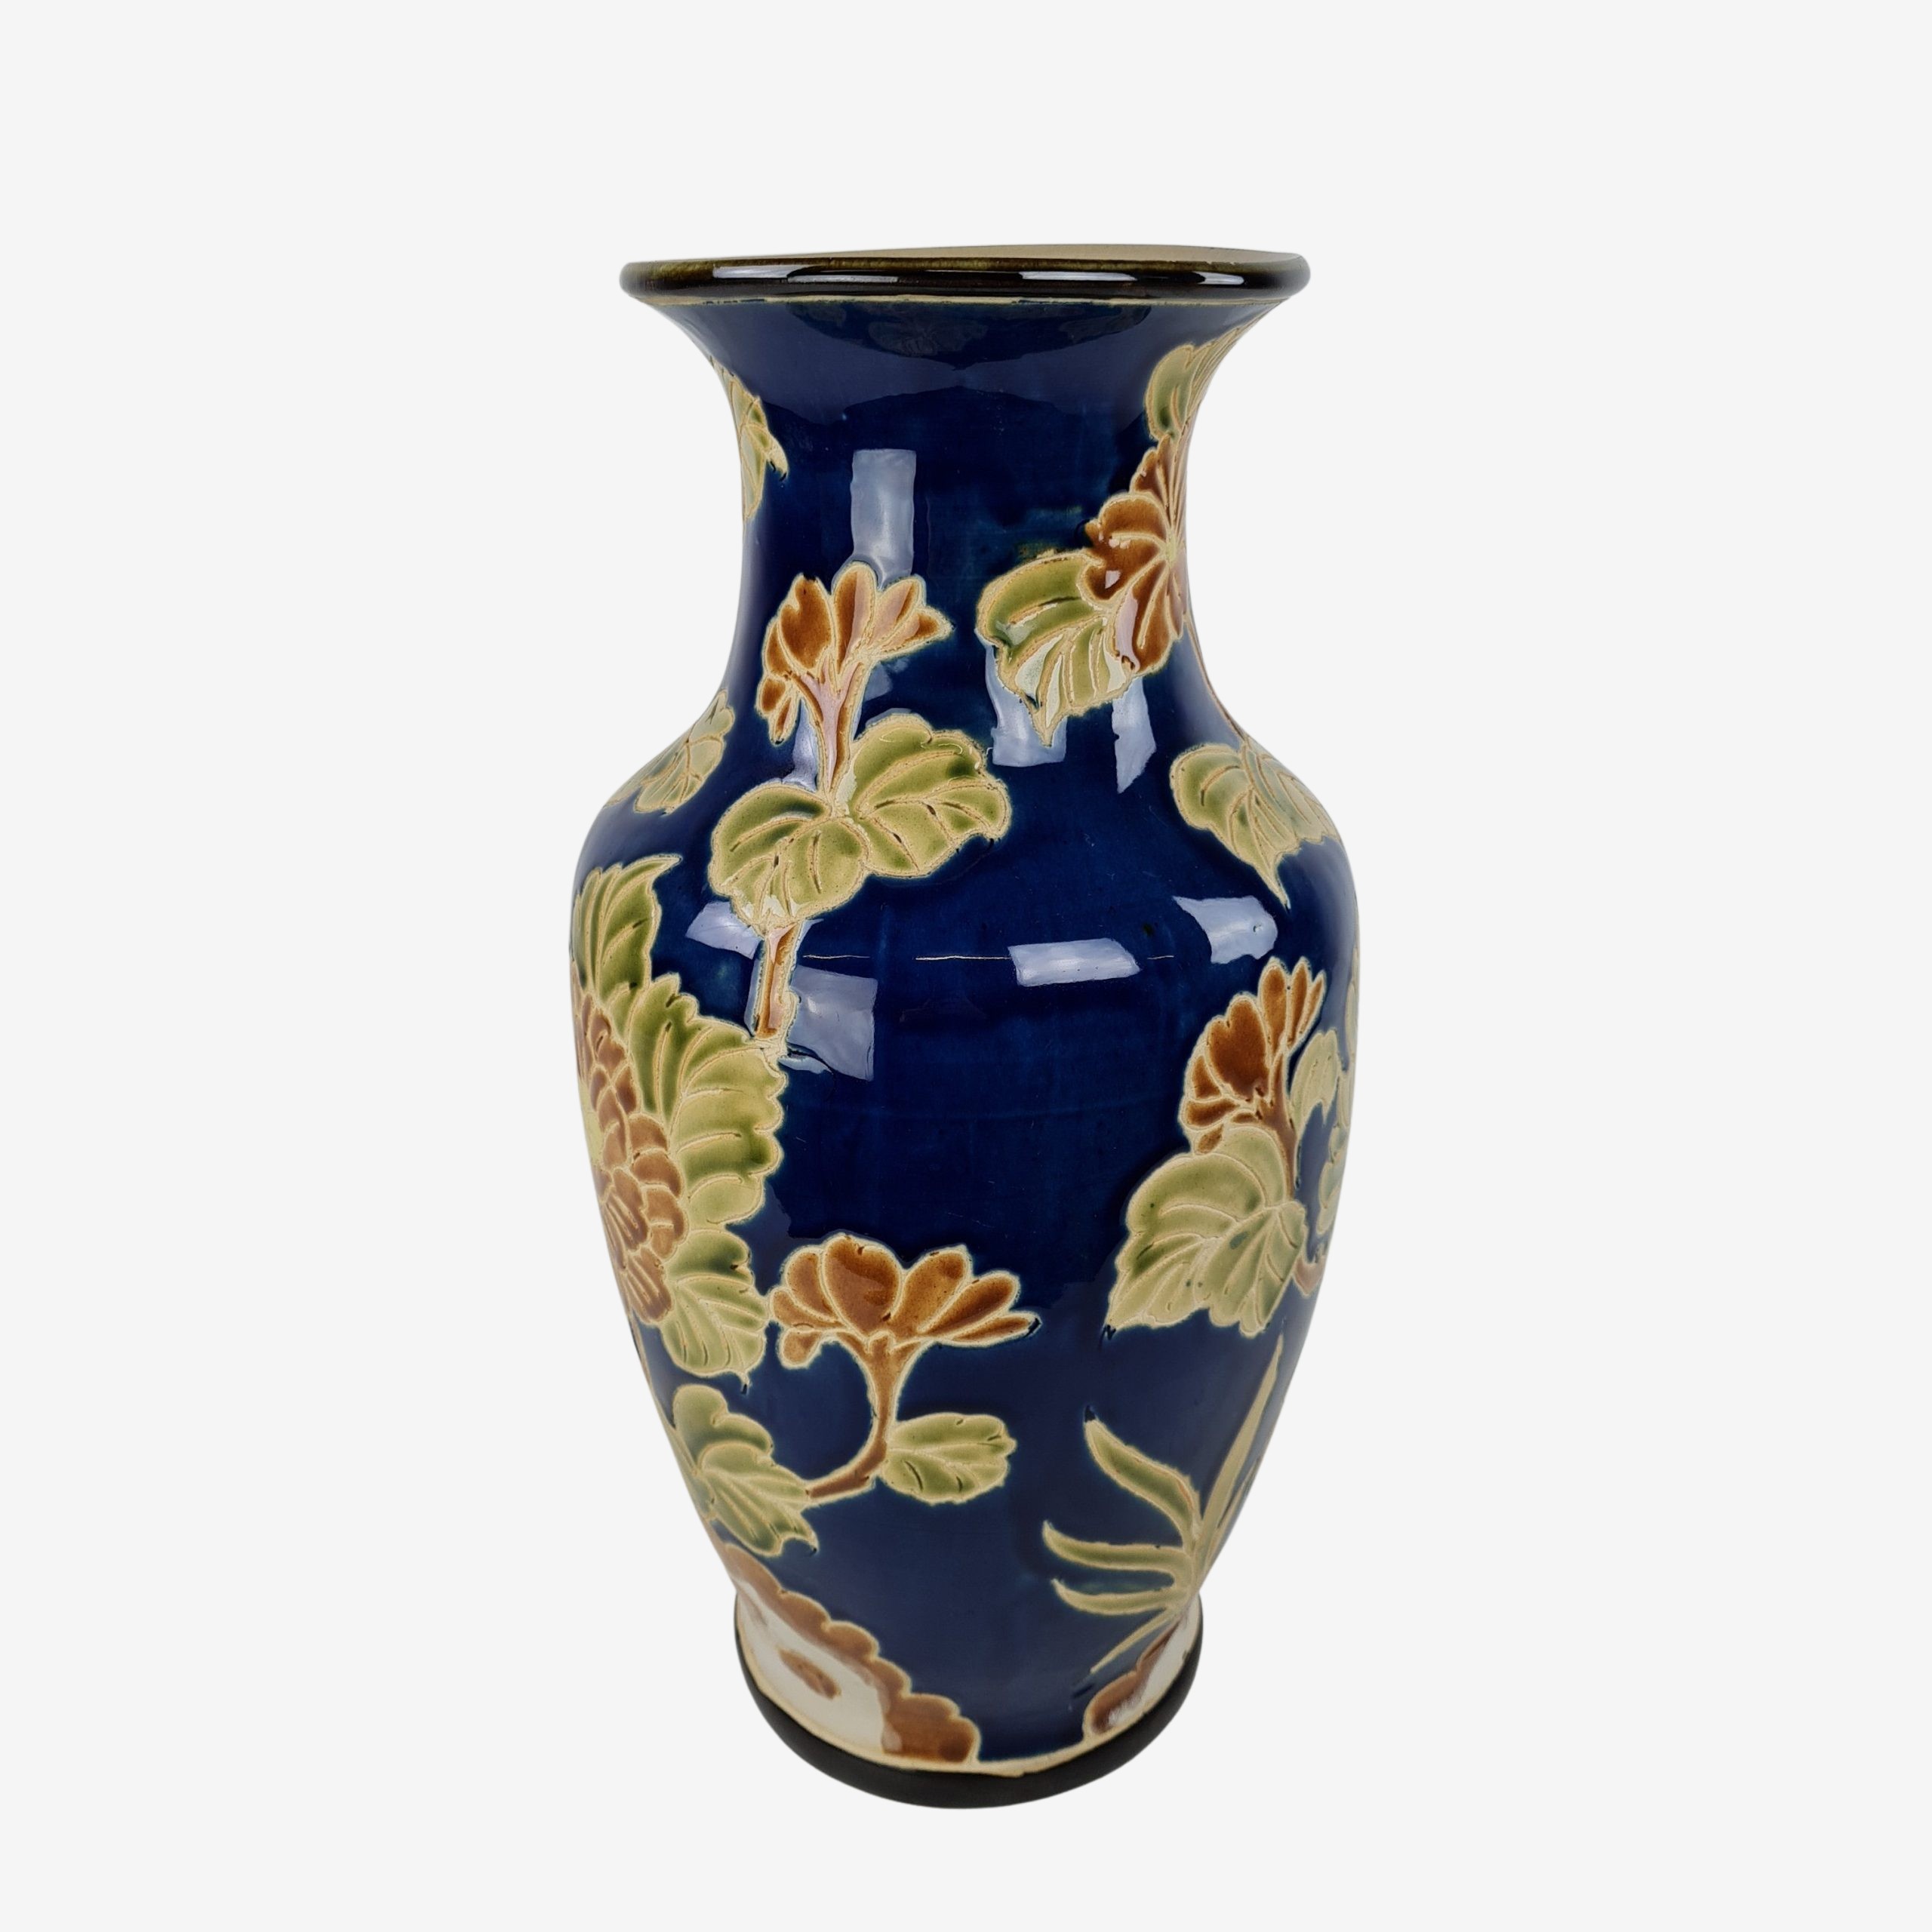 Ceramic floor vase with midnight blue glaze and decorated with flowers